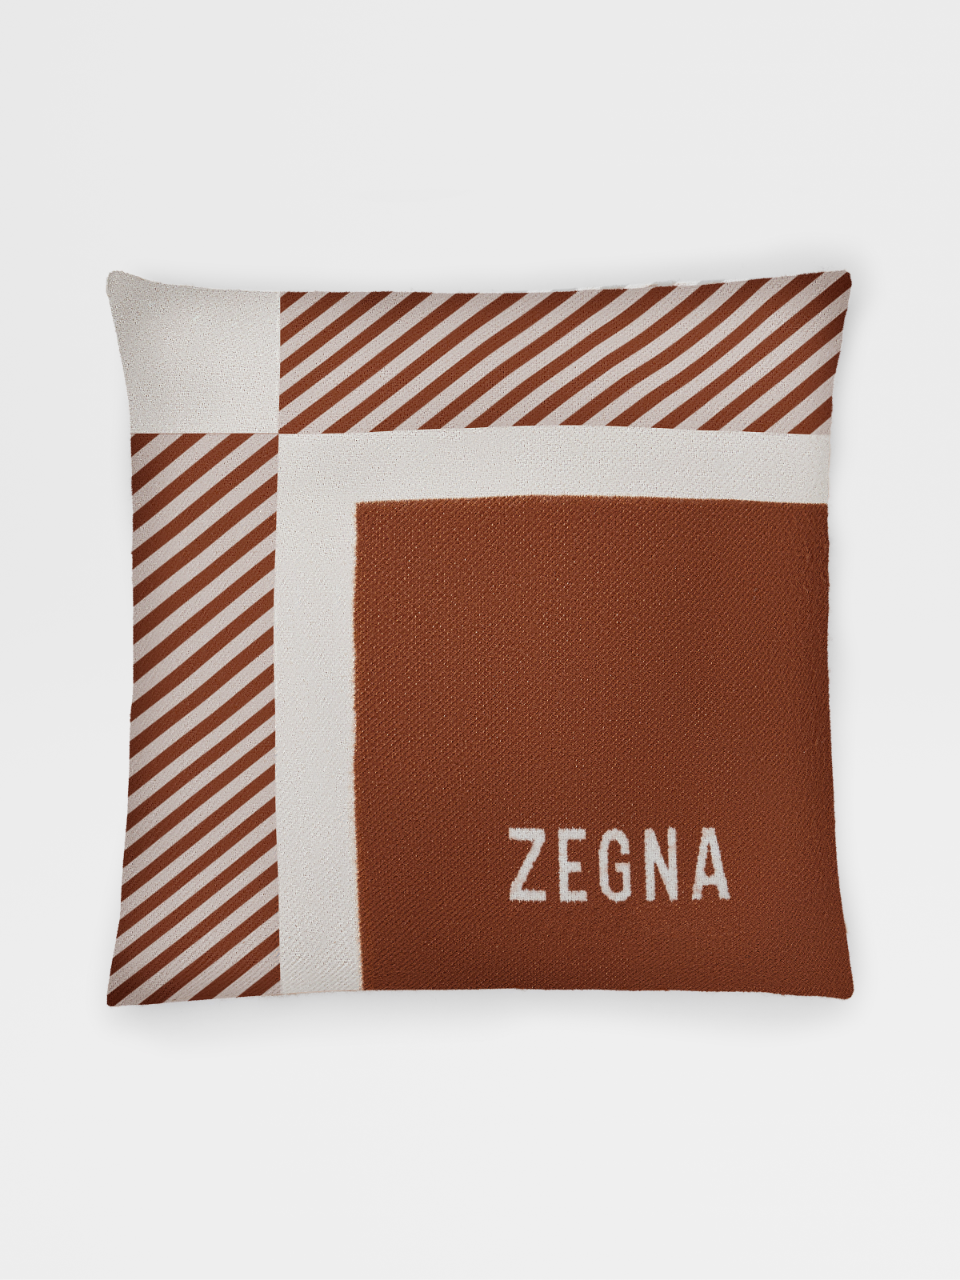 Light Brown Wool Pillow with Geometric Pattern